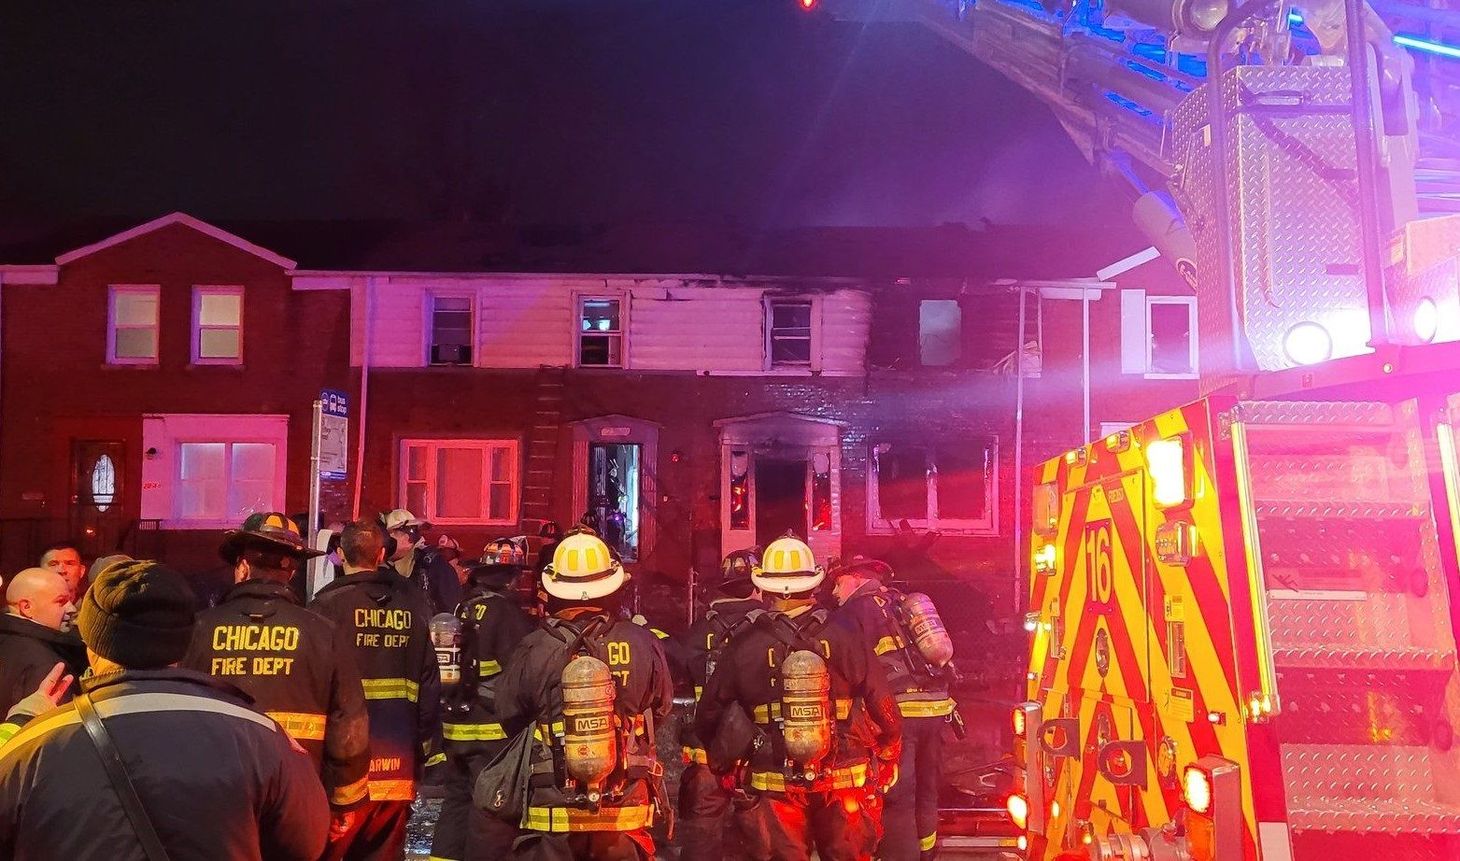 Floor collapses onto Chicago firefighters battling fire